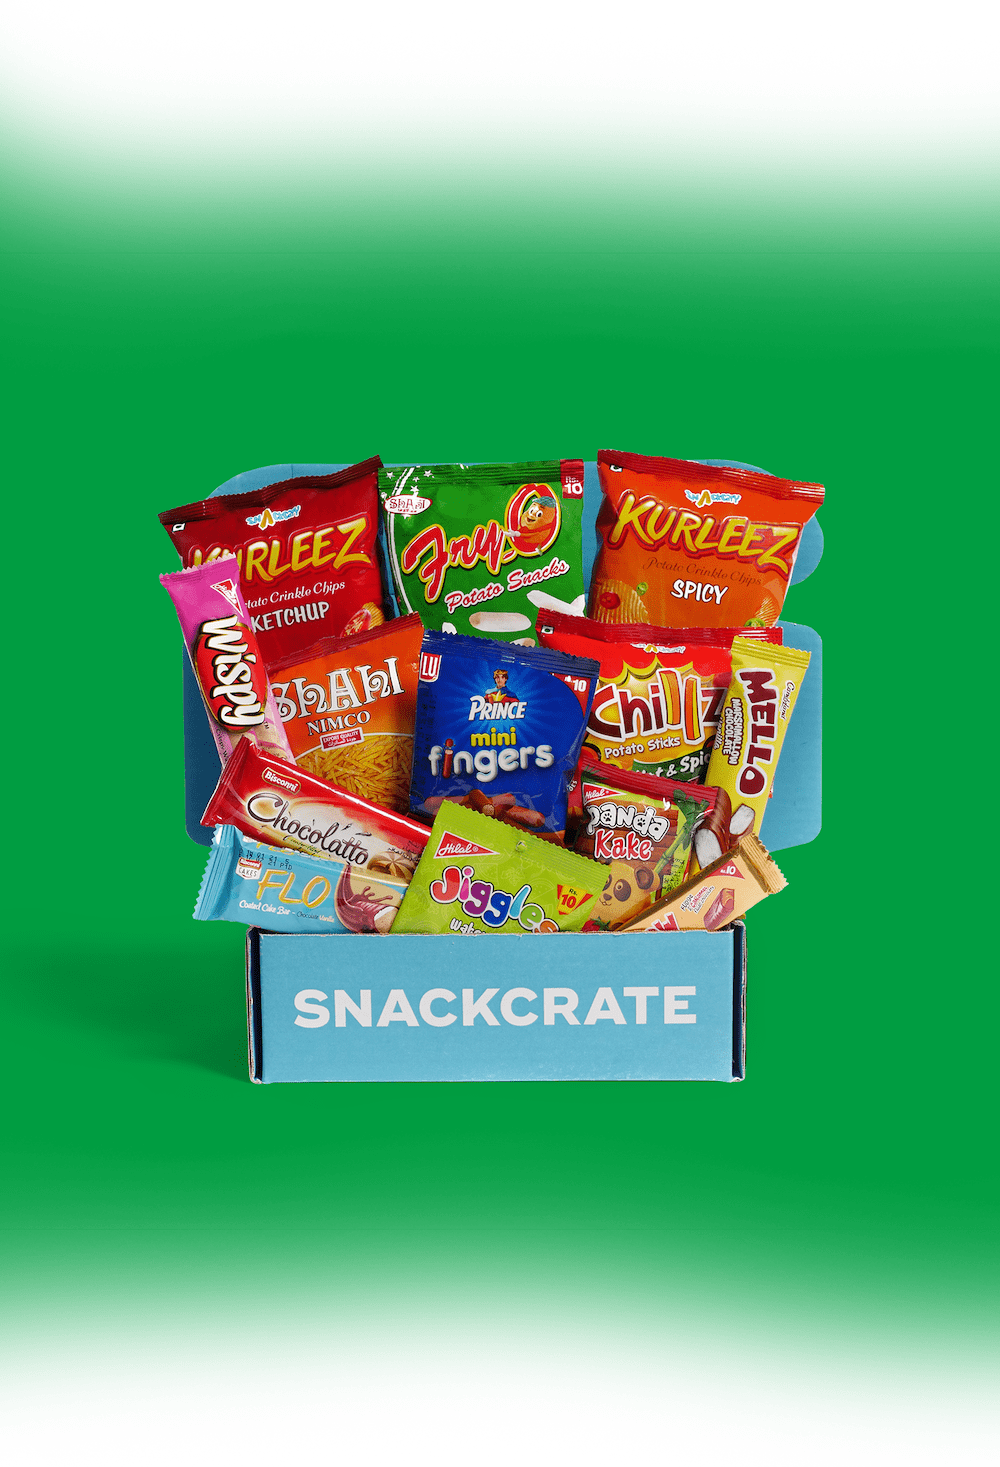 Pakistan snackcrate full of foreign snacks